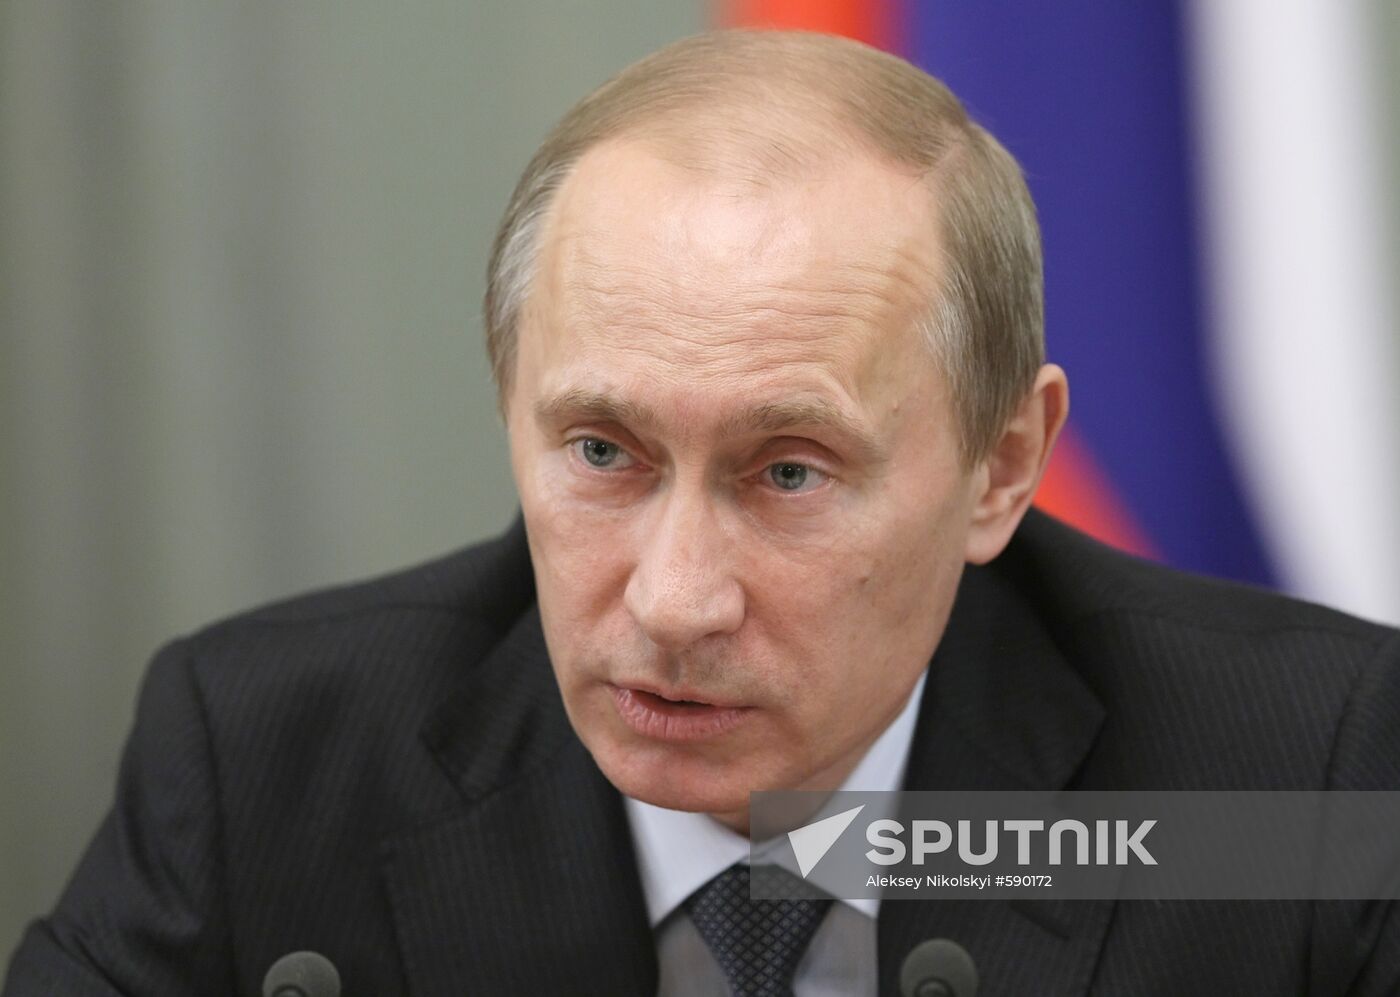 Vladimir Putin chairs meeting in Moscow